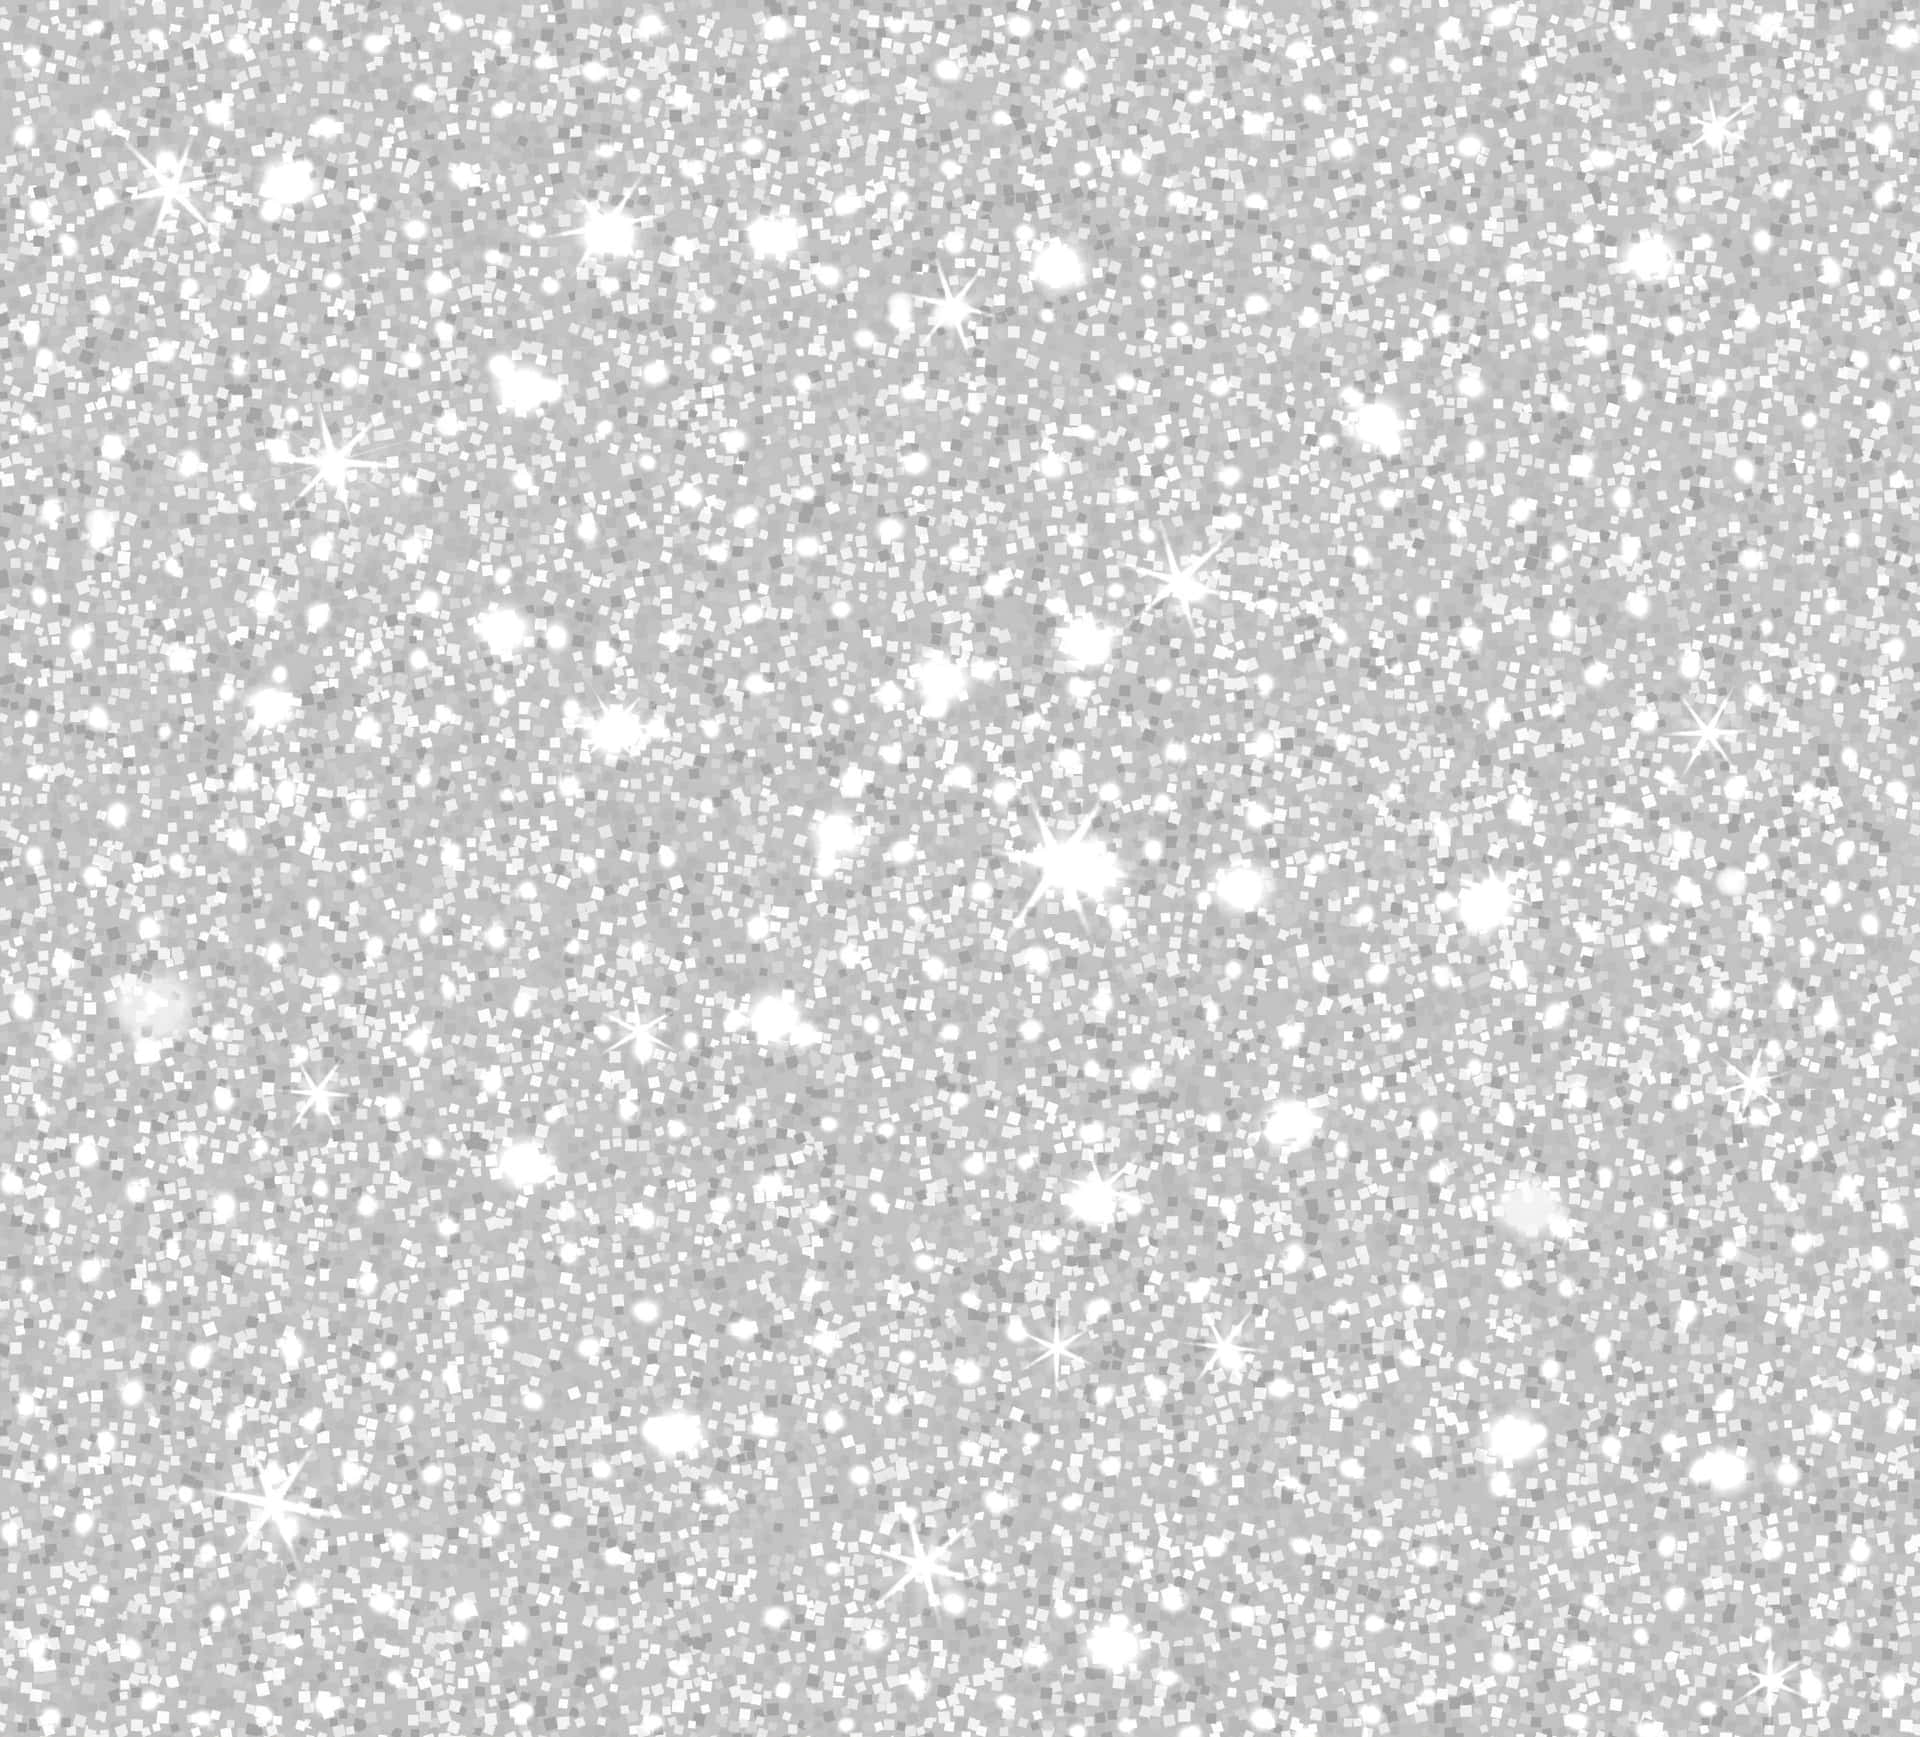 A White And Silver Glittery Background